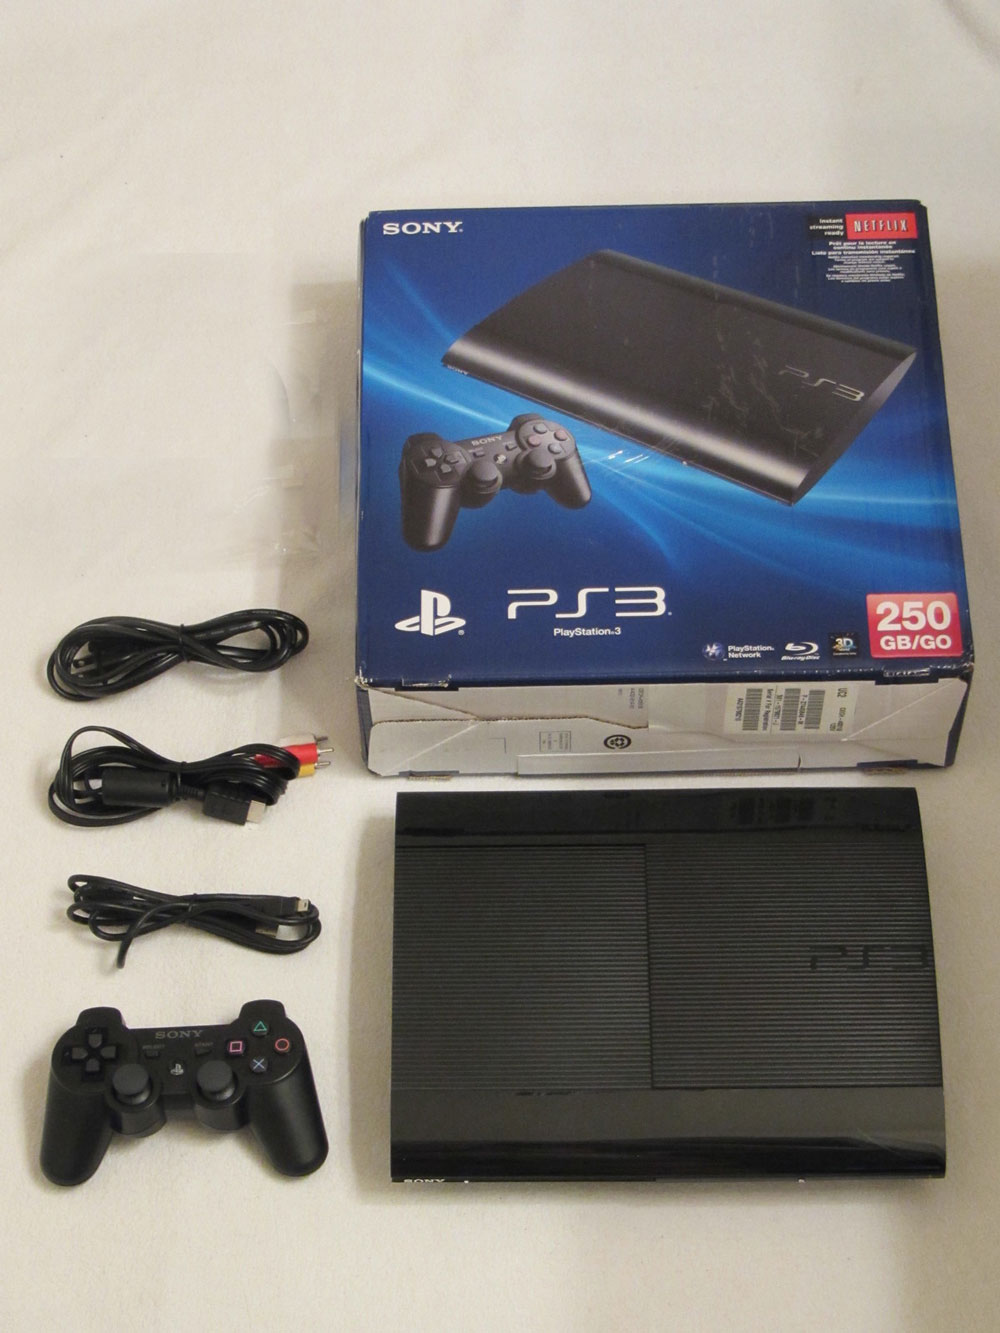 Playstation 3 Super Slim 250gb With Uncharted 3 game cd ..CHEAP** -  Technology Market - Nigeria